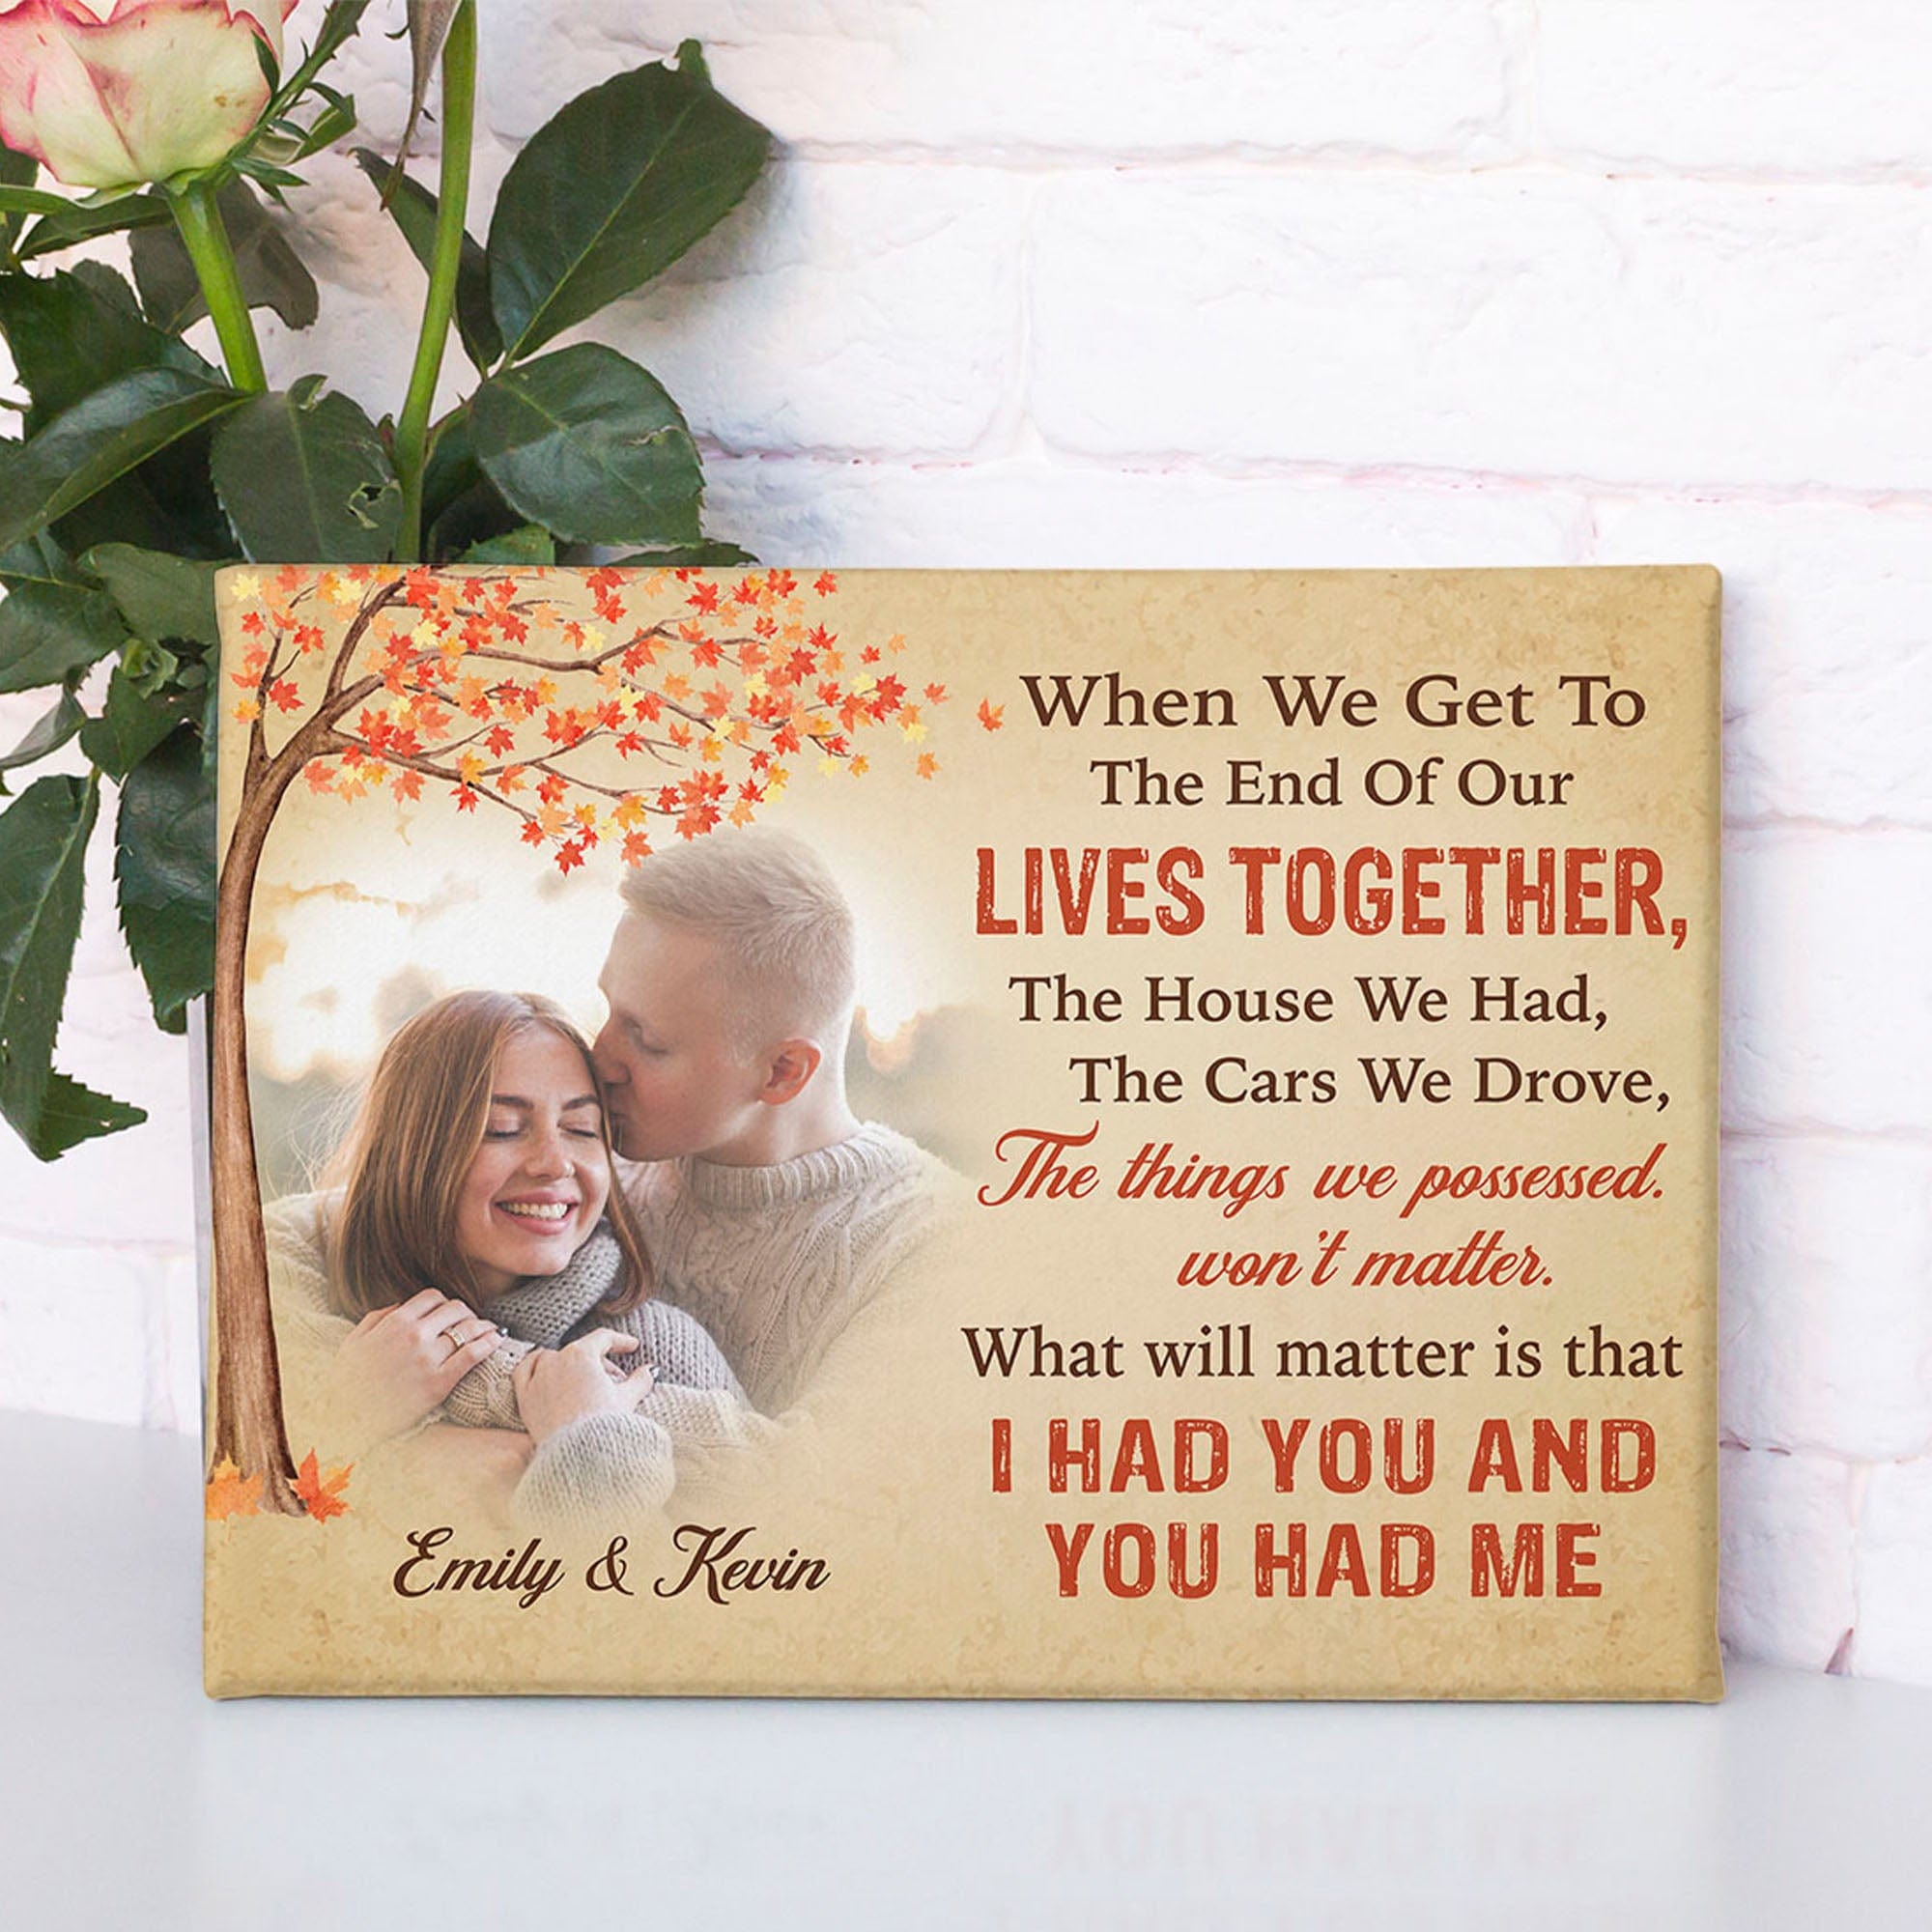 GeckoCustom The Things We Possessed Won't Matter Personalized Anniversary Photo Print Canvas C583 12"x8"